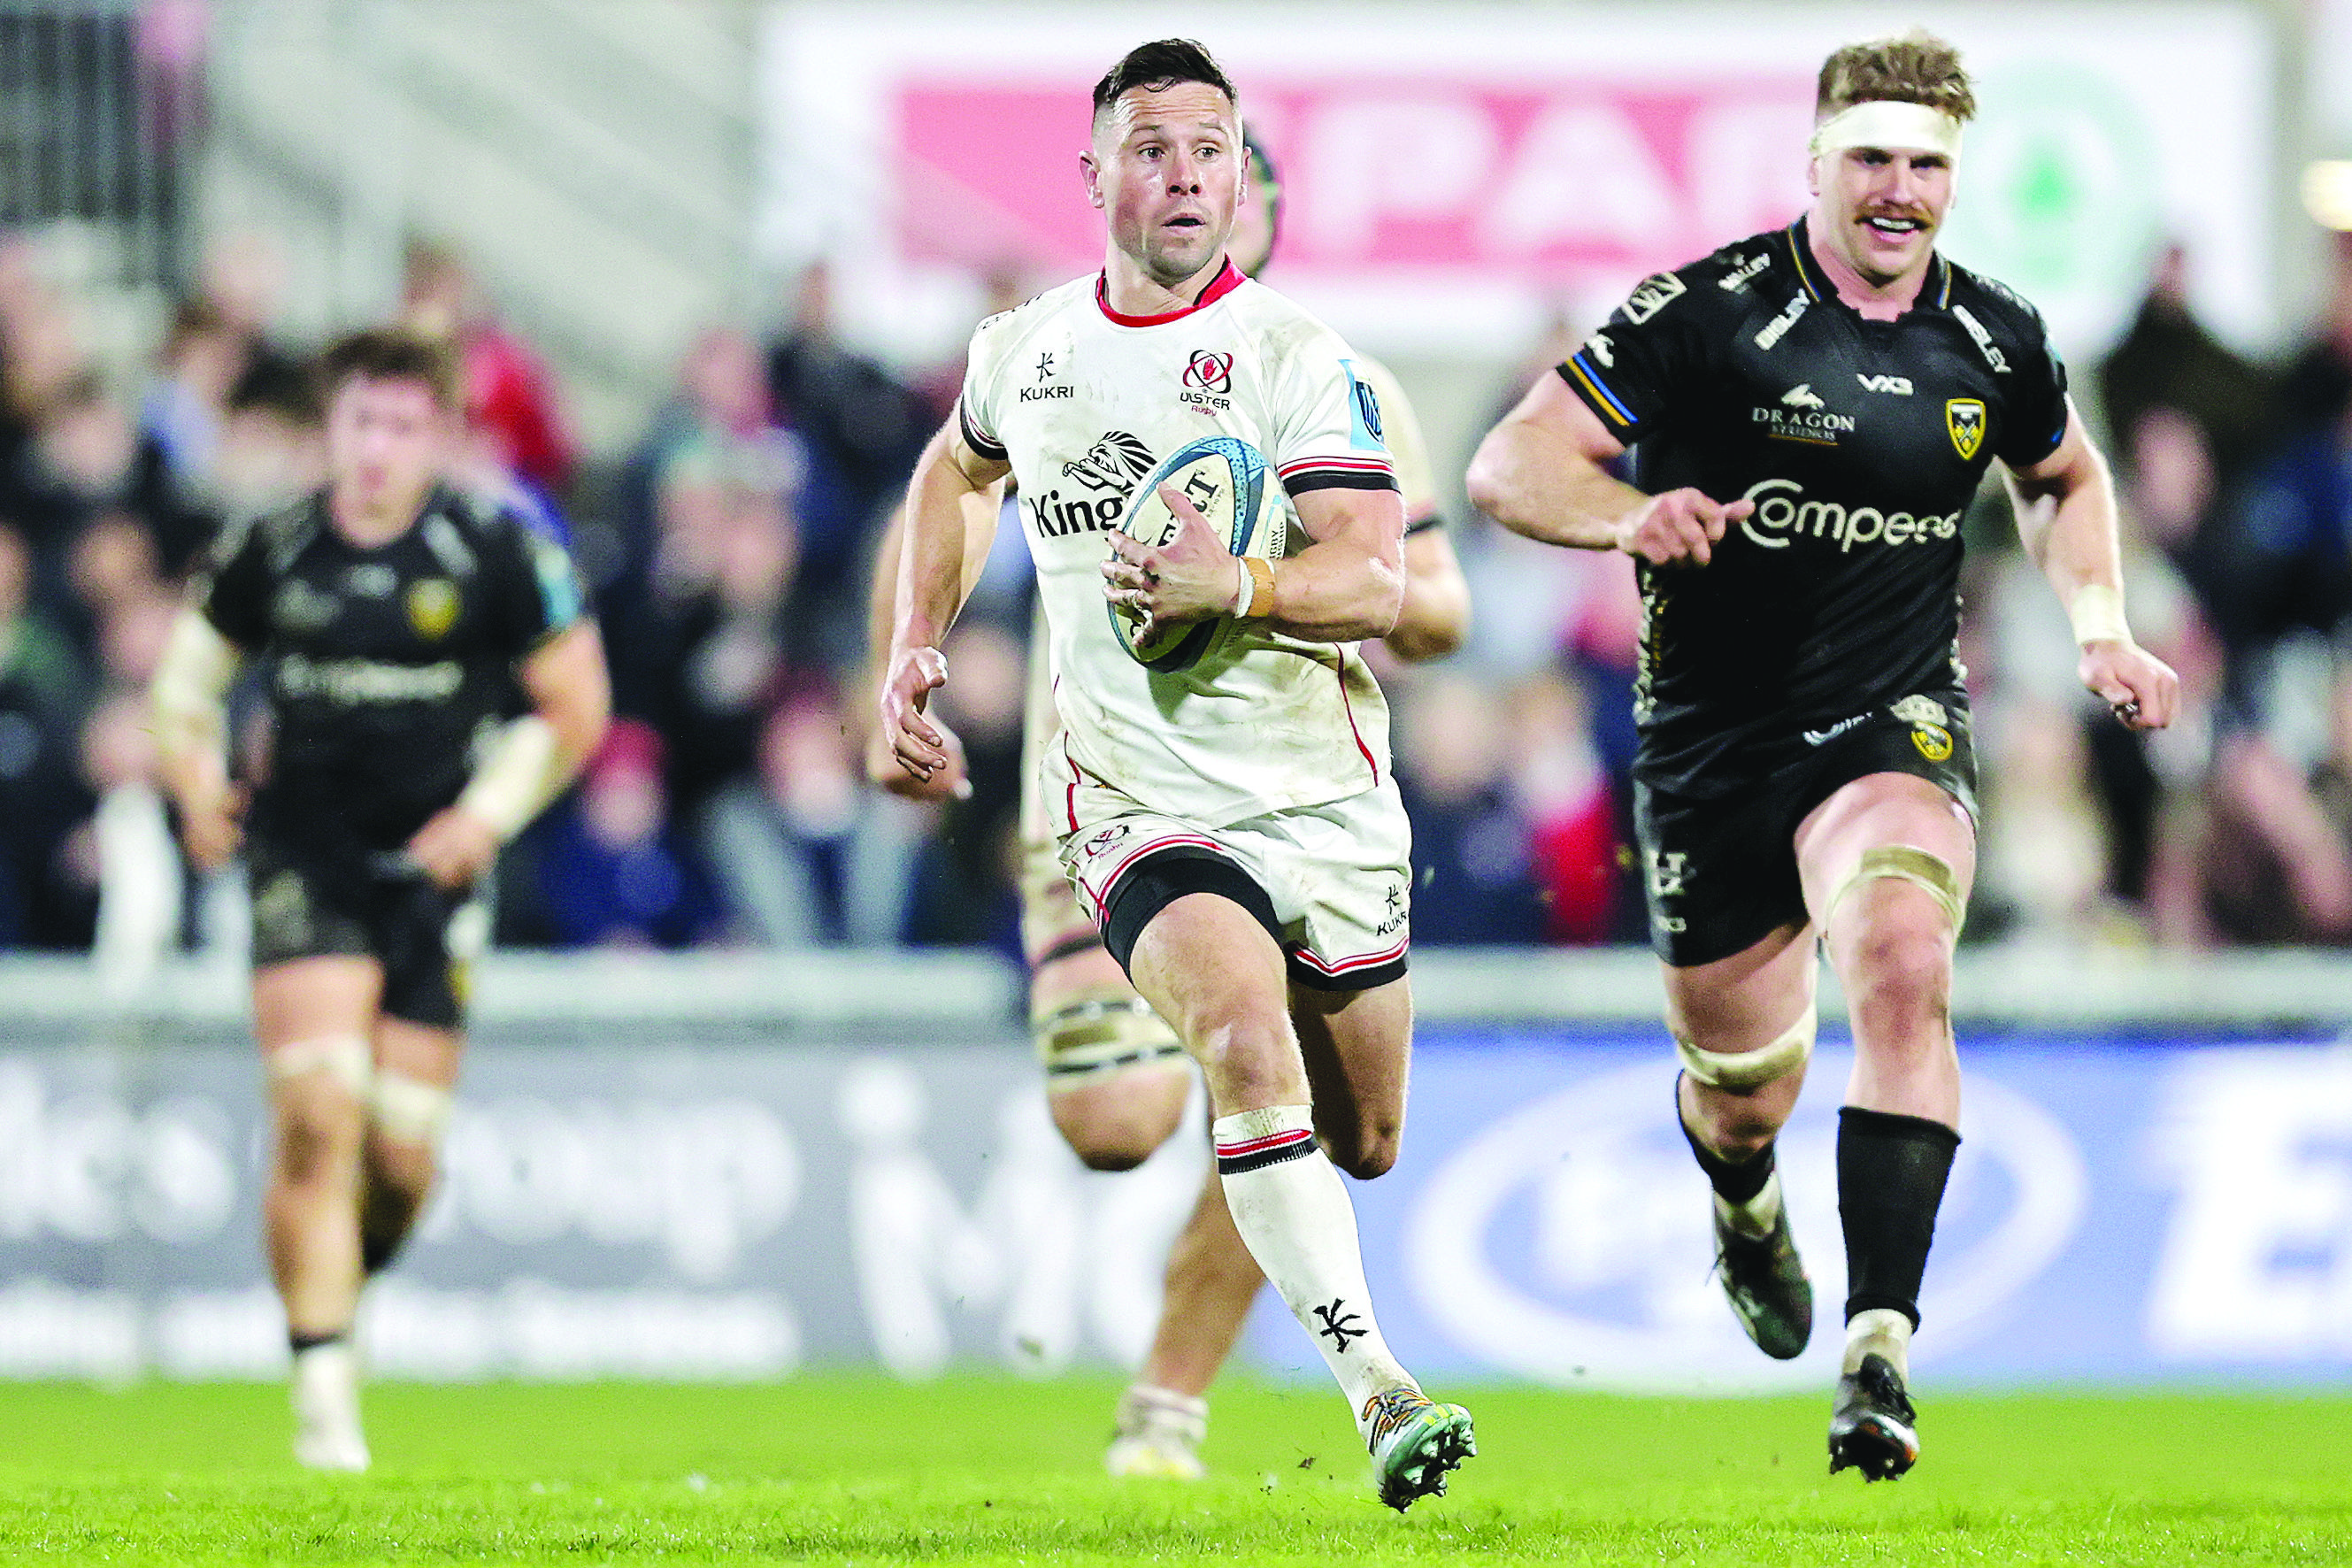 United Rugby Championship Ulster can secure second with Edinburgh win